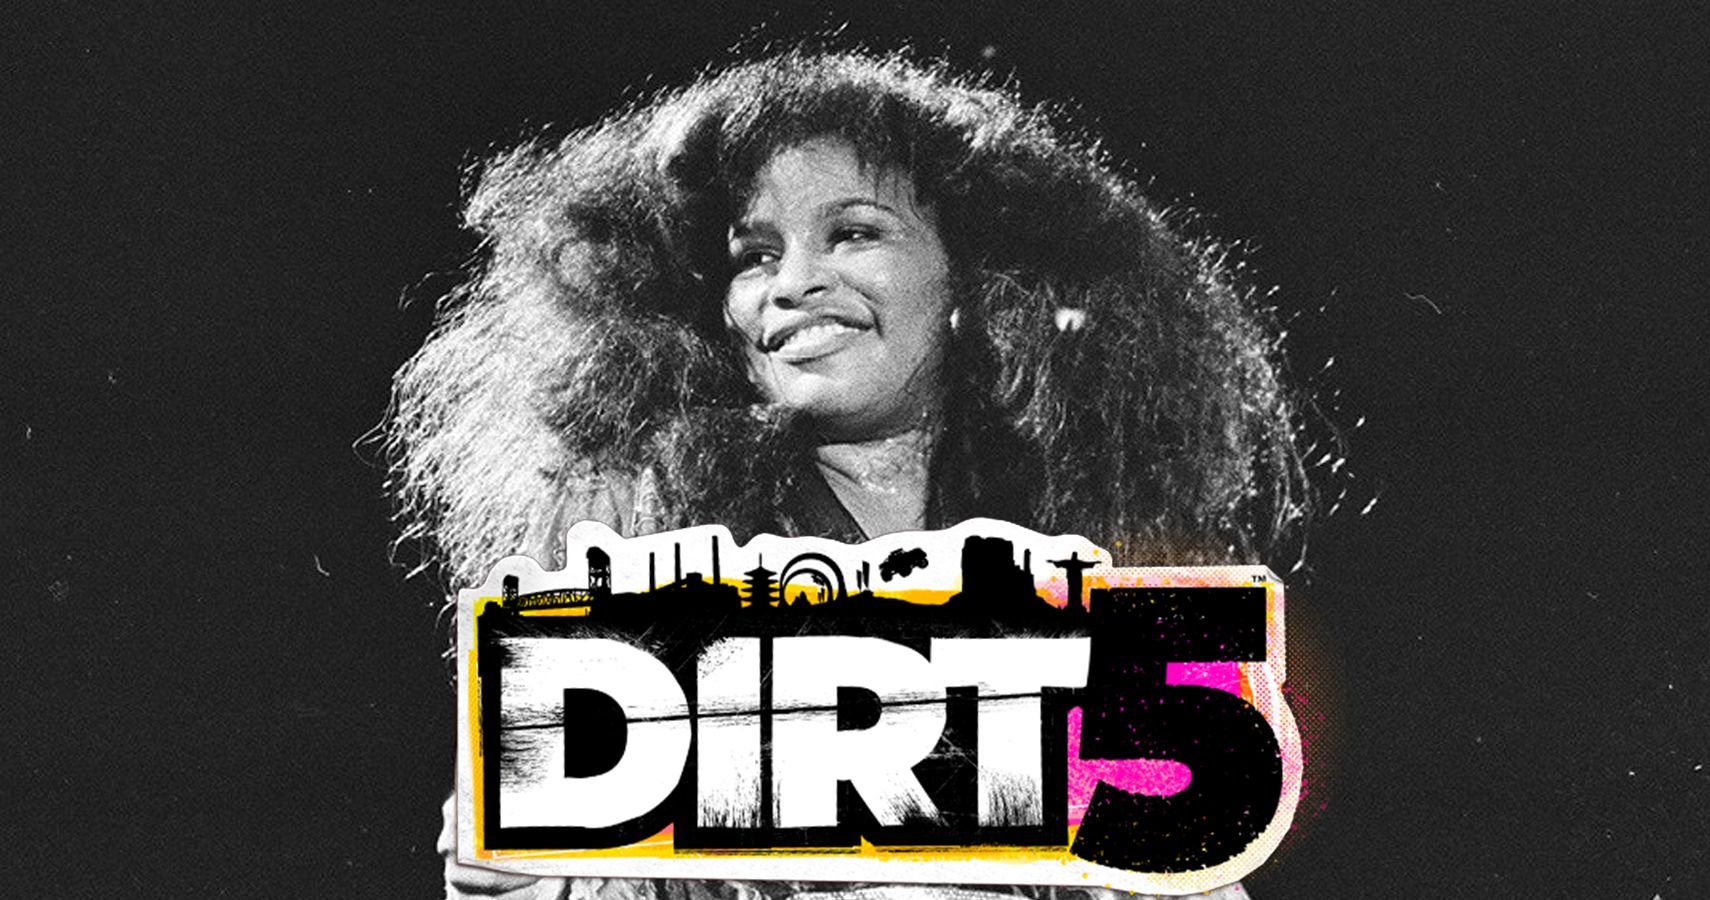 5. "The Dirt" Soundtrack - wide 4